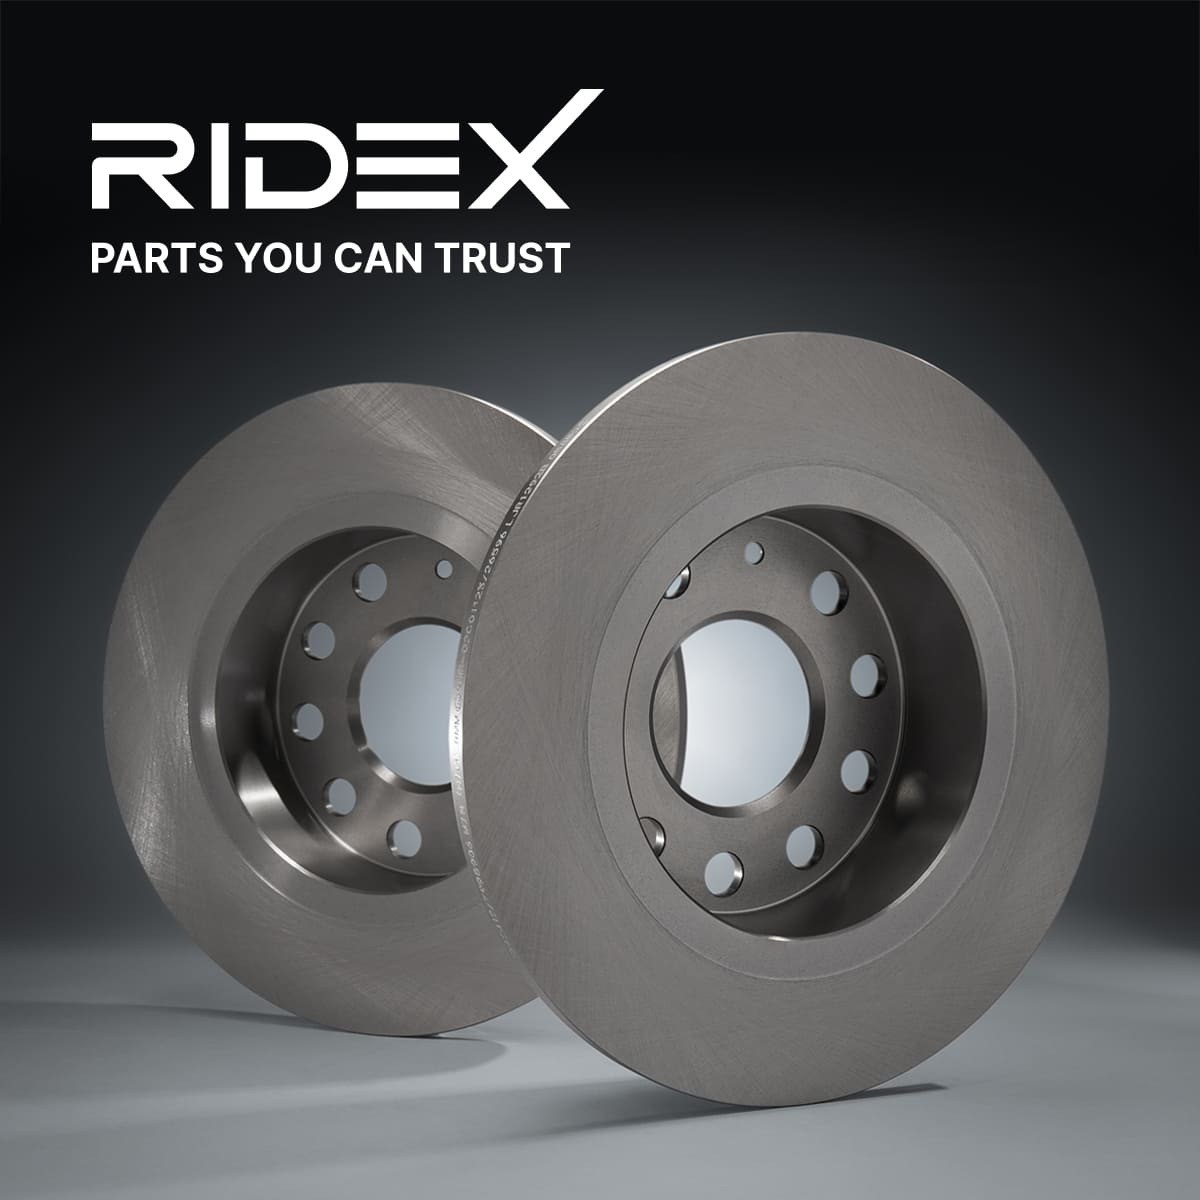 RIDEX 82B2441 Brake rotor Front, Front Axle, 276, 10x120, Vented